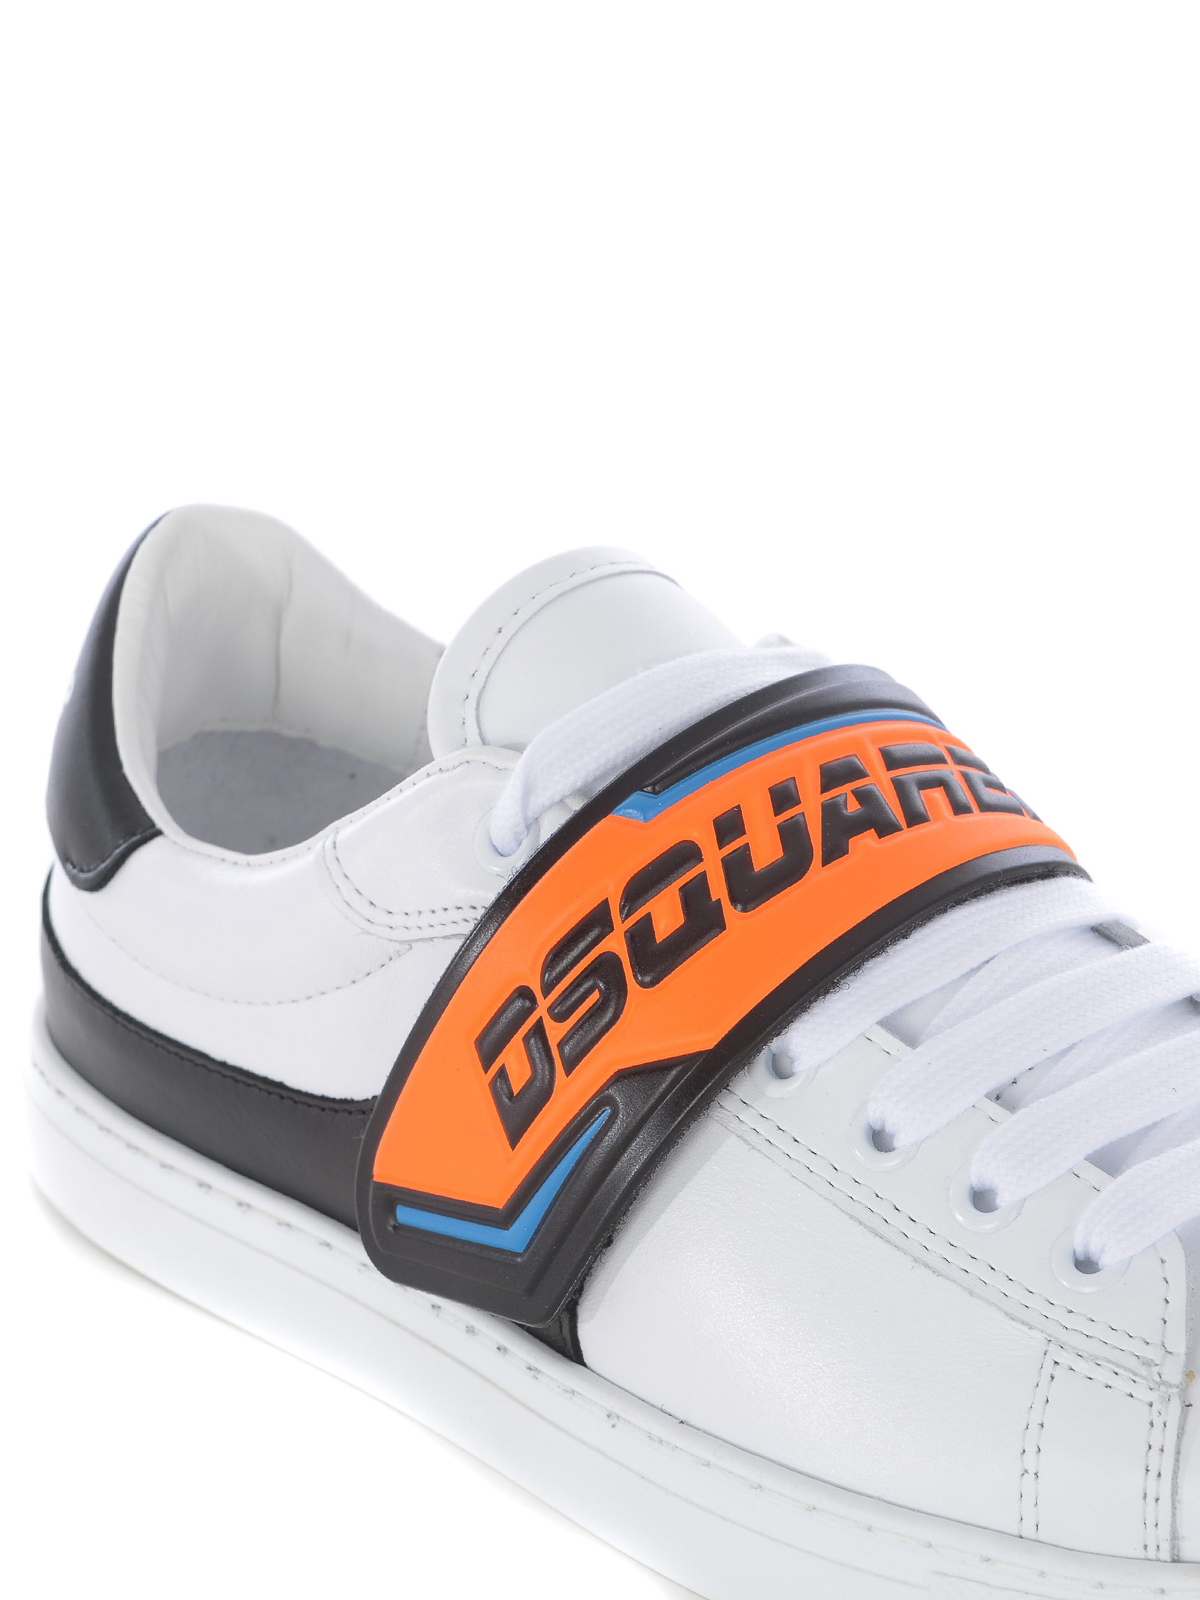 dsquared chaussure ete